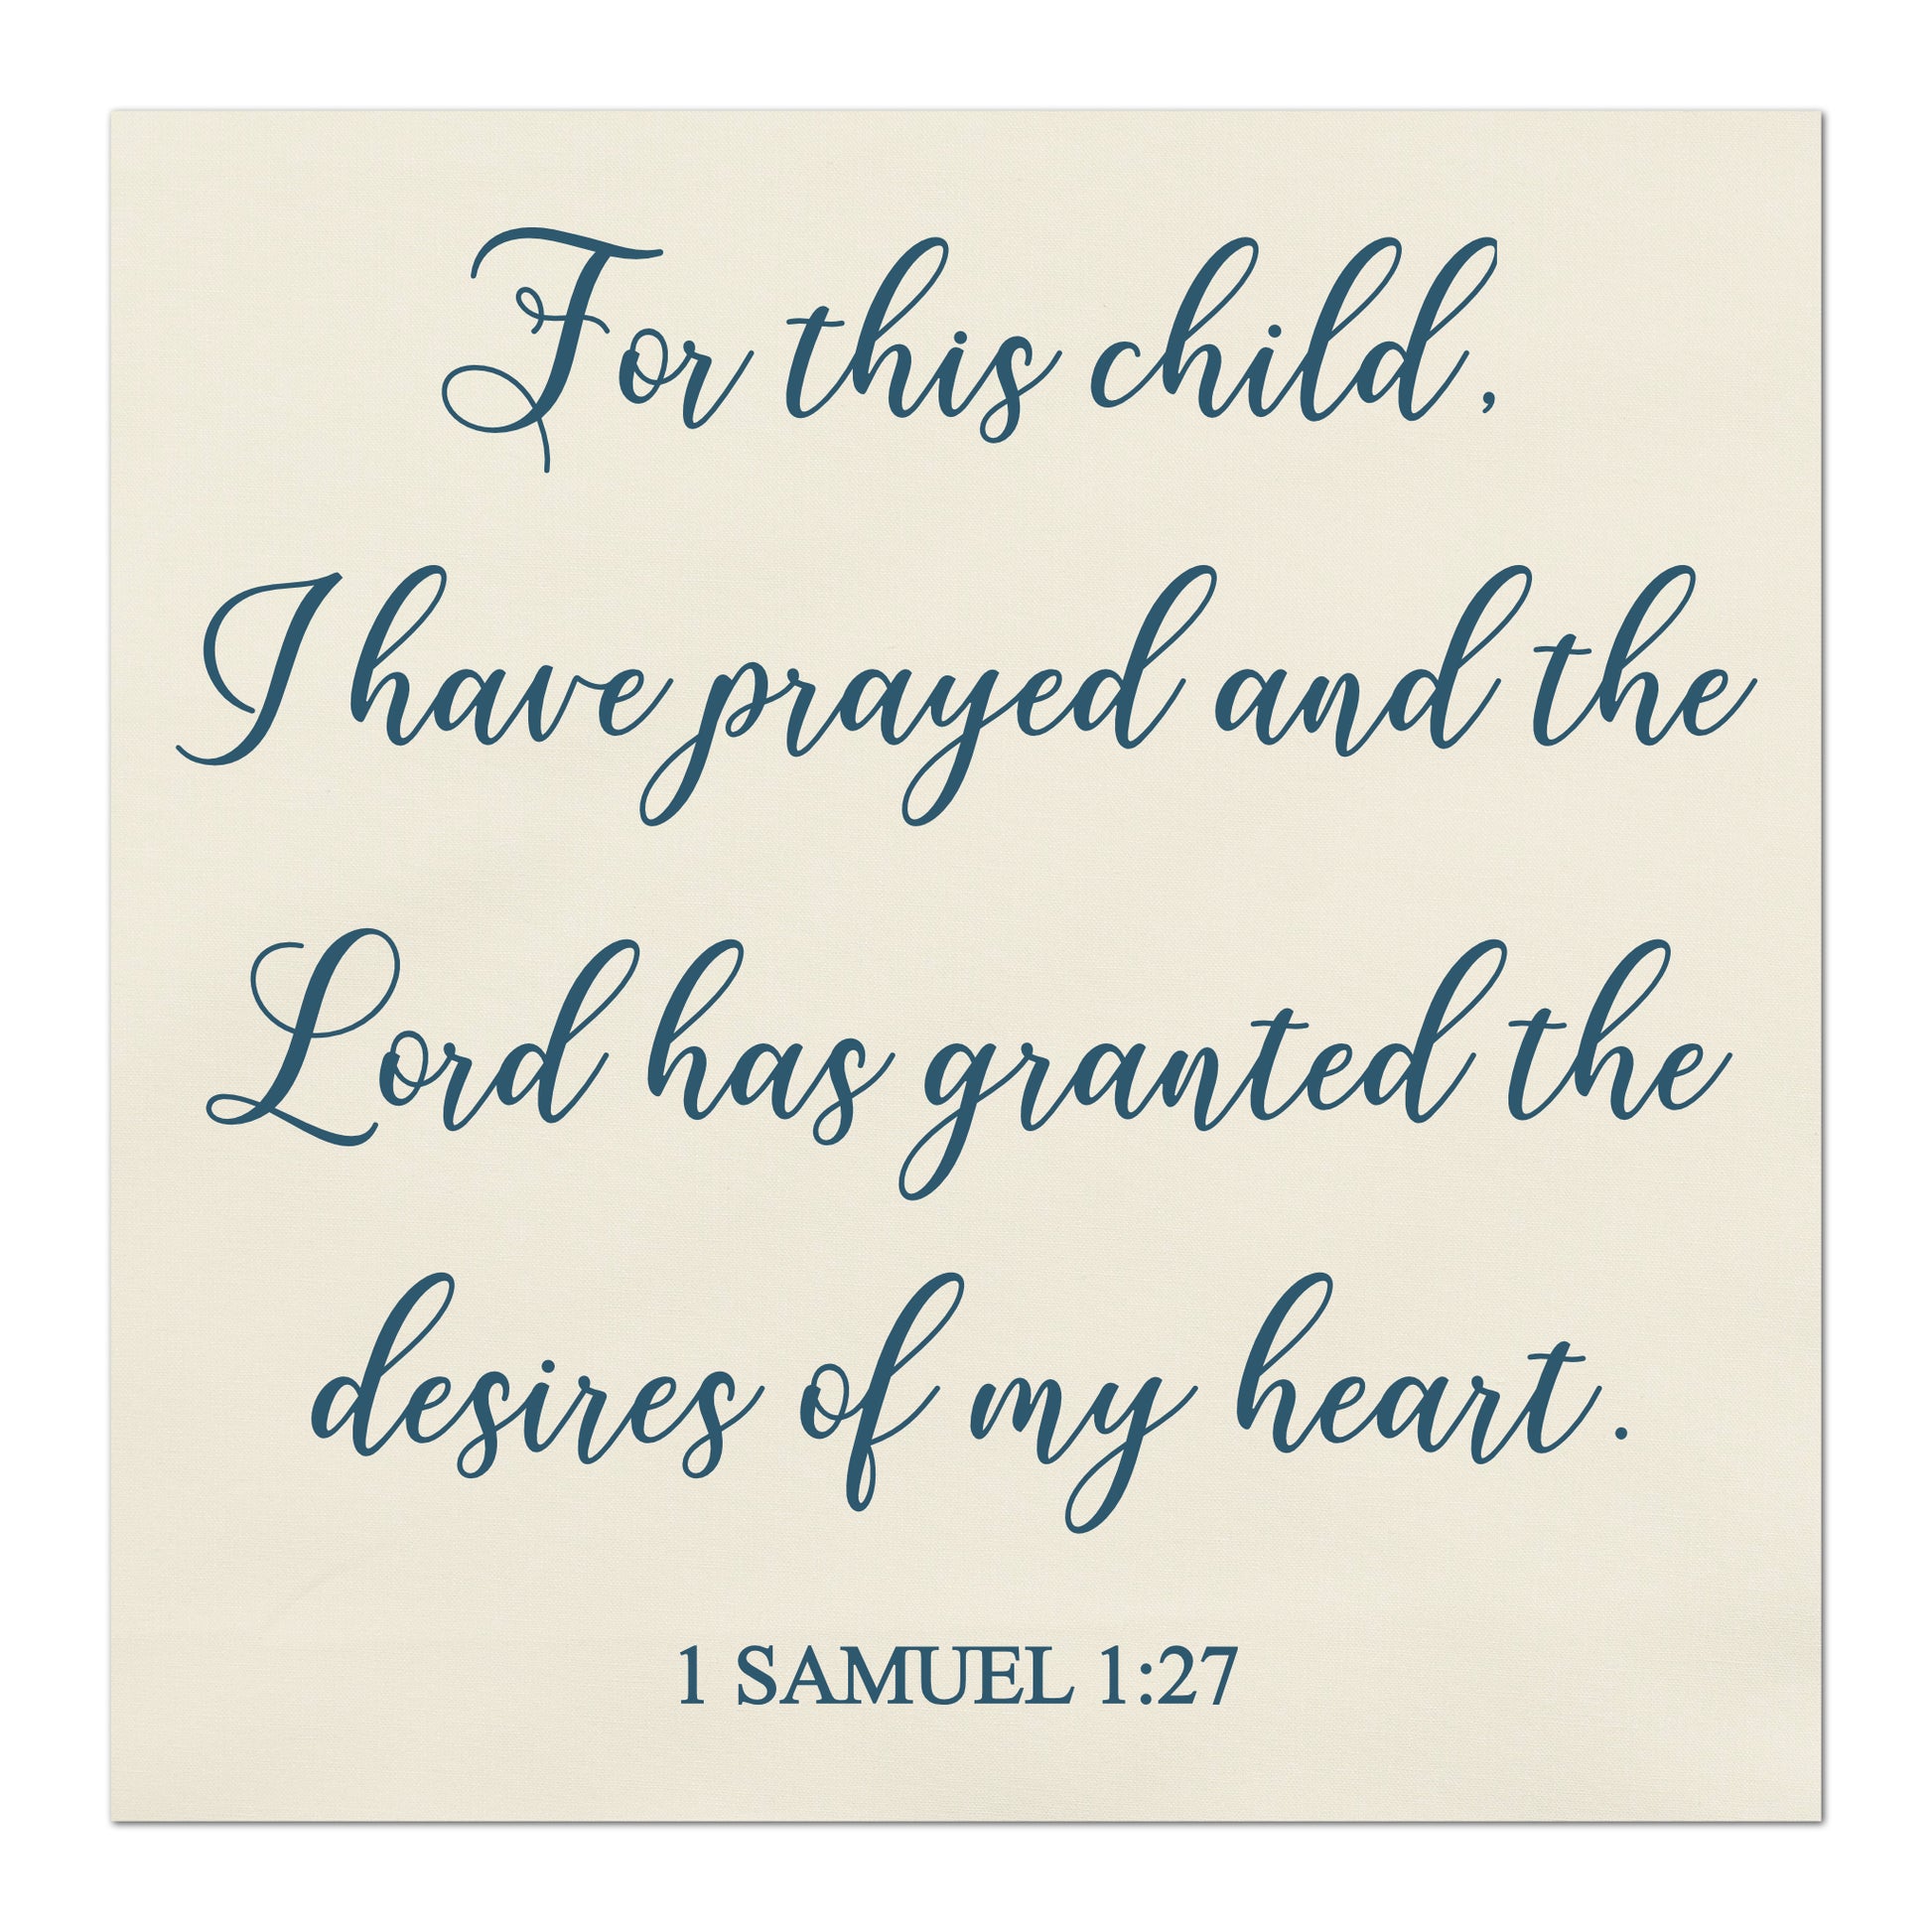 For This Child I Have Prayed, and the Lord has granted the desires of my heart - 1 Samuel 1:27, Bible Verse, Scripture Fabric